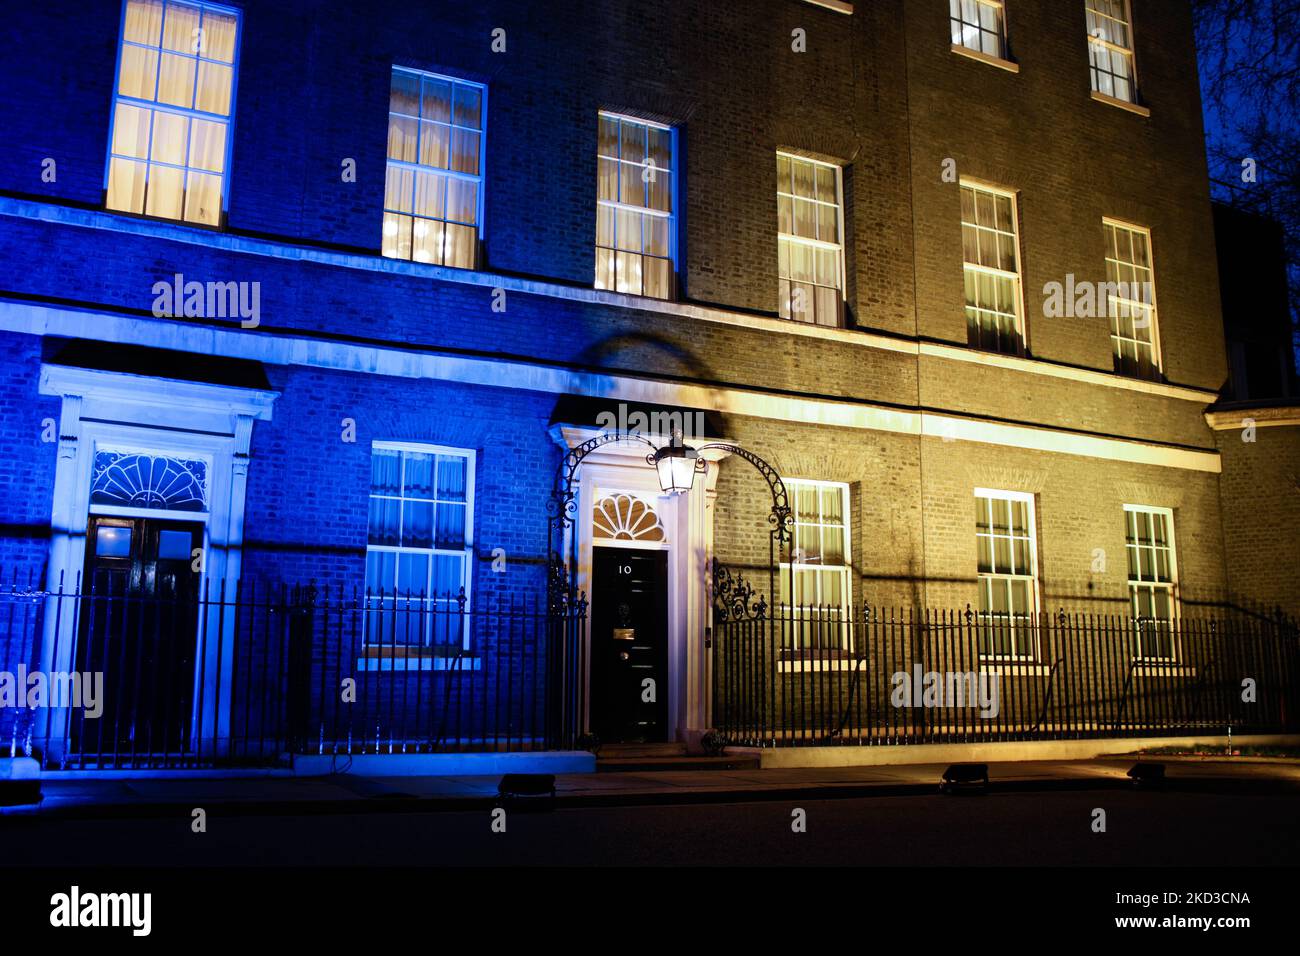 The colours of the Ukrainian flag light the facade of 10 Downing Street in London, England, on February 24, 2022. British Prime Minister Boris Johnson announced this evening that major Russian banks will be excluded from the UK financial system and oligarchs targeted in new sanctions unveiled in response to Russia's invasion of Ukraine. Russia's national airline Aeroflot will also be banned from landing in the UK. (Photo by David Cliff/NurPhoto) Stock Photo